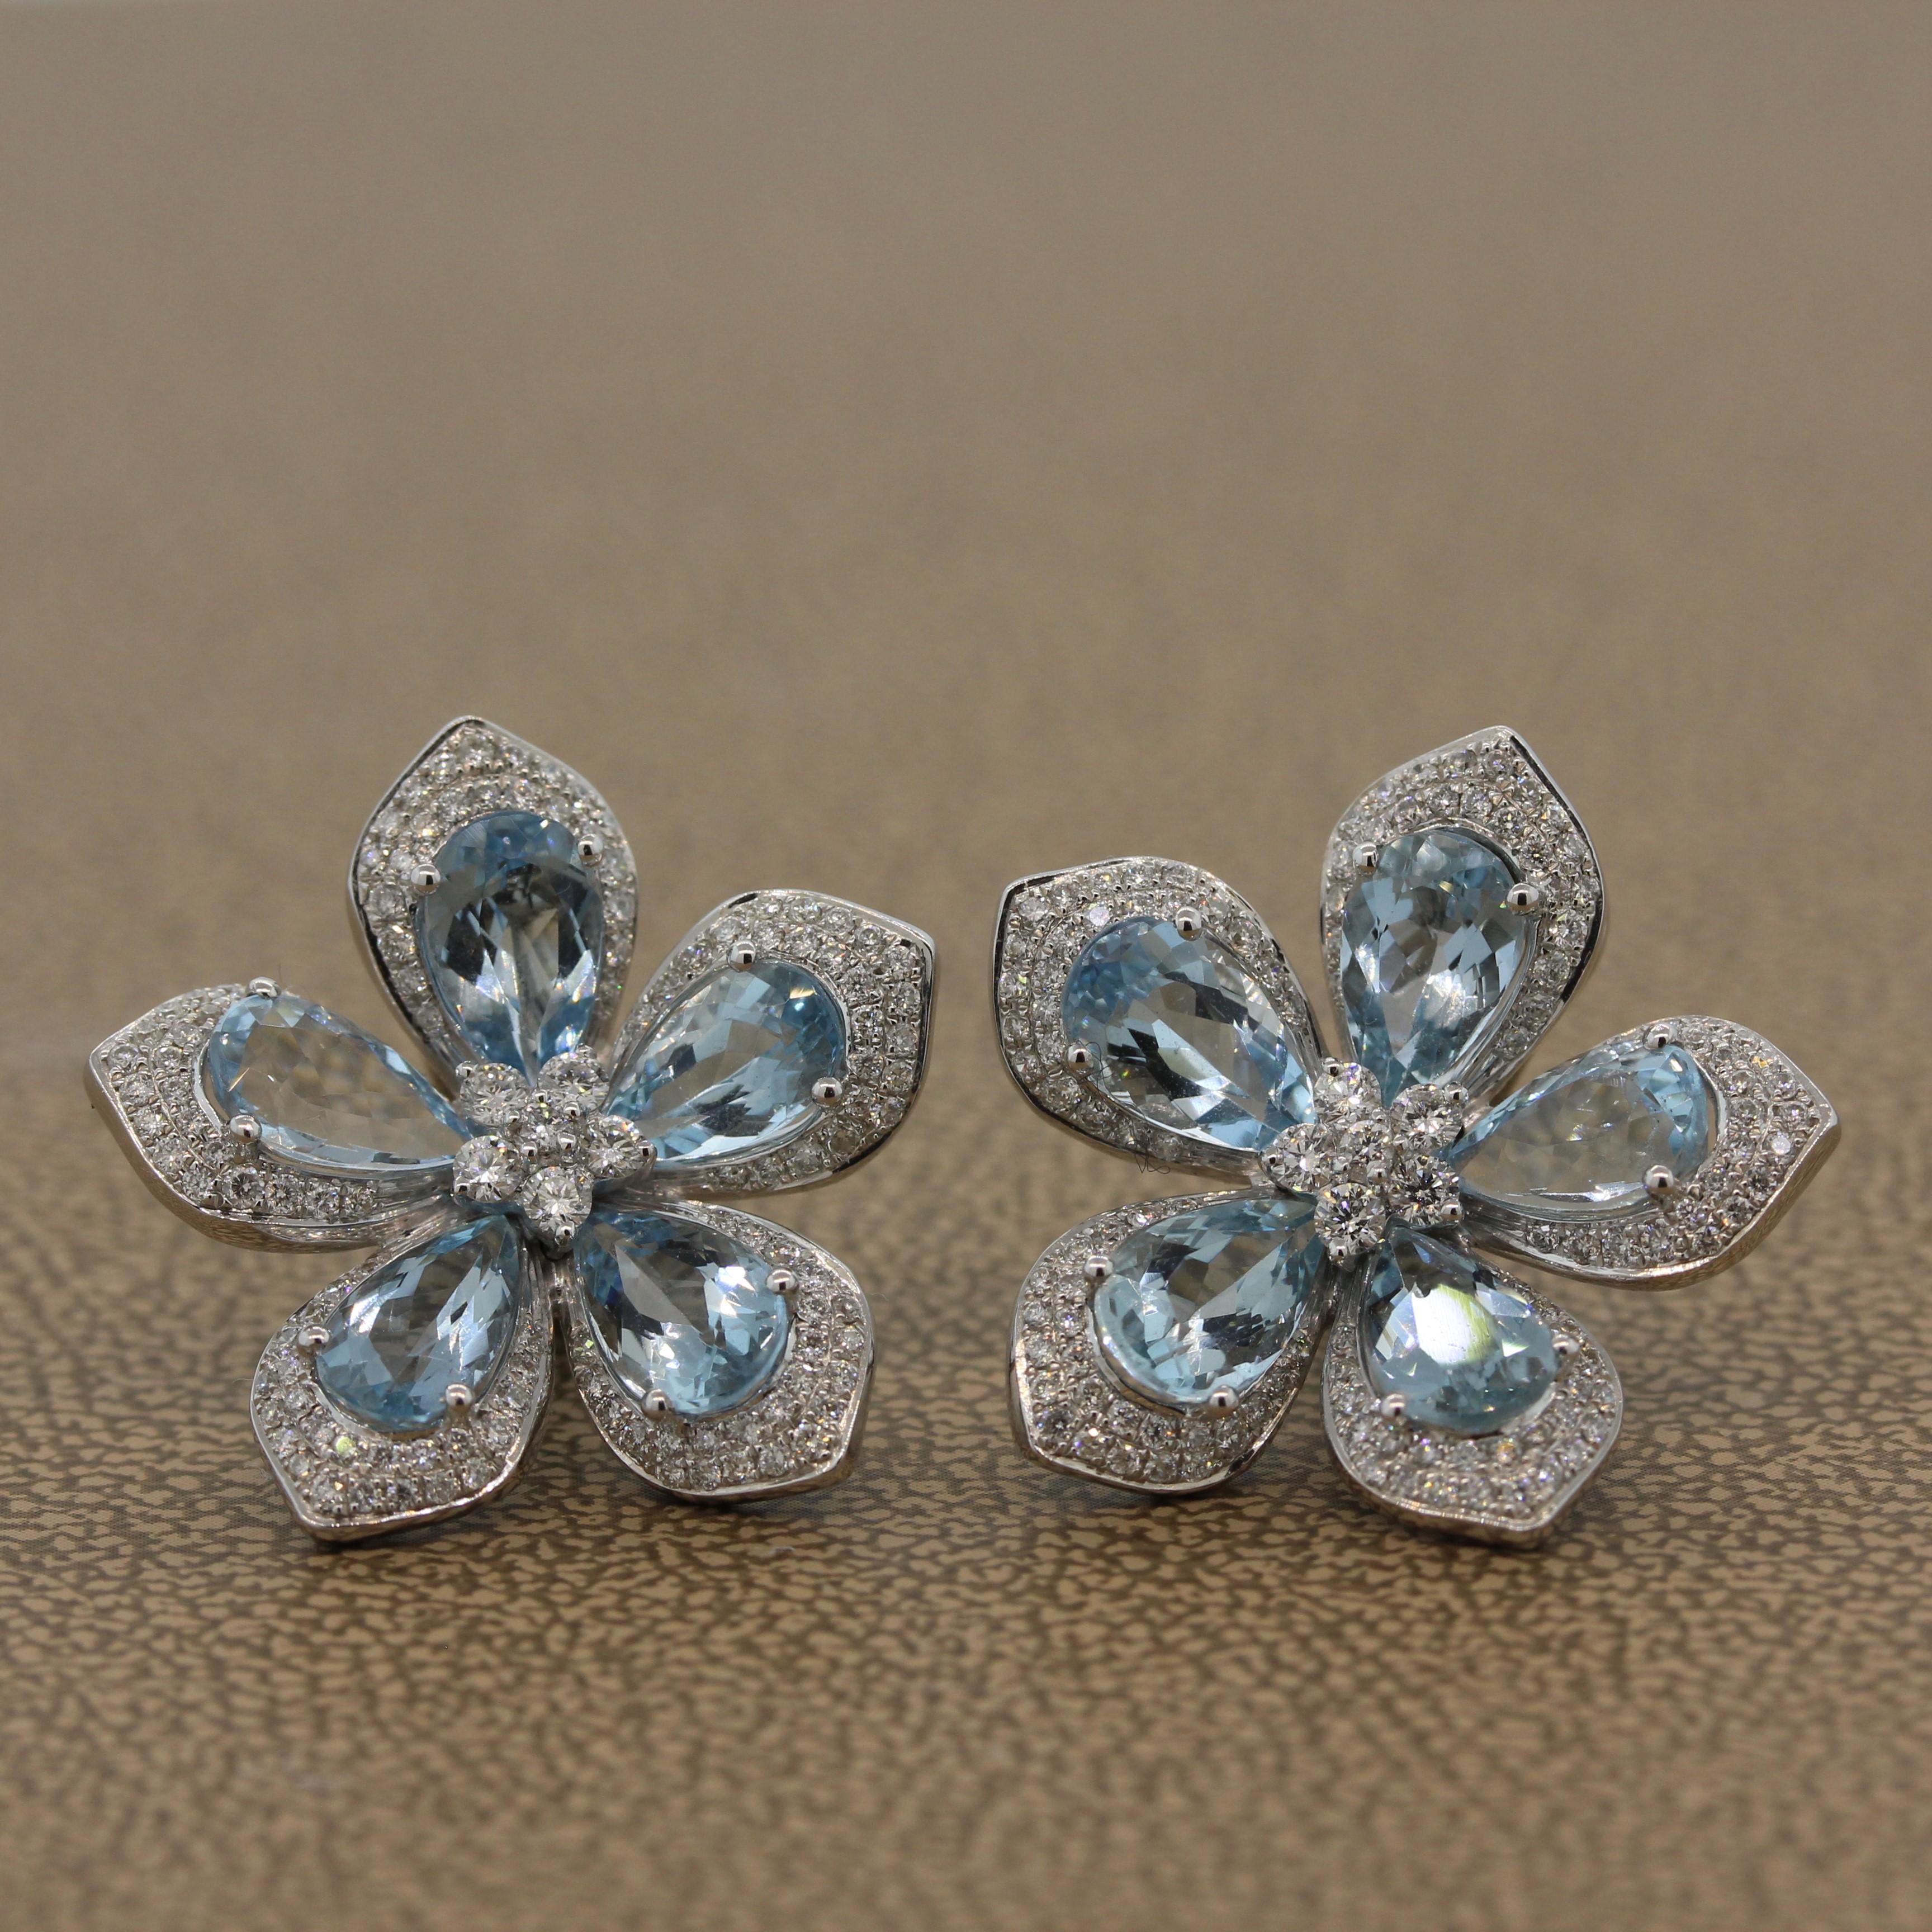 These five petal flower earrings, set in 18K white gold, are comprised of 6.91 carats of pear cut ocean blue aquamarine. With 1.28 carats of diamonds haloing each aquamarine and a flower cluster in the center, these light and feminine earrings will